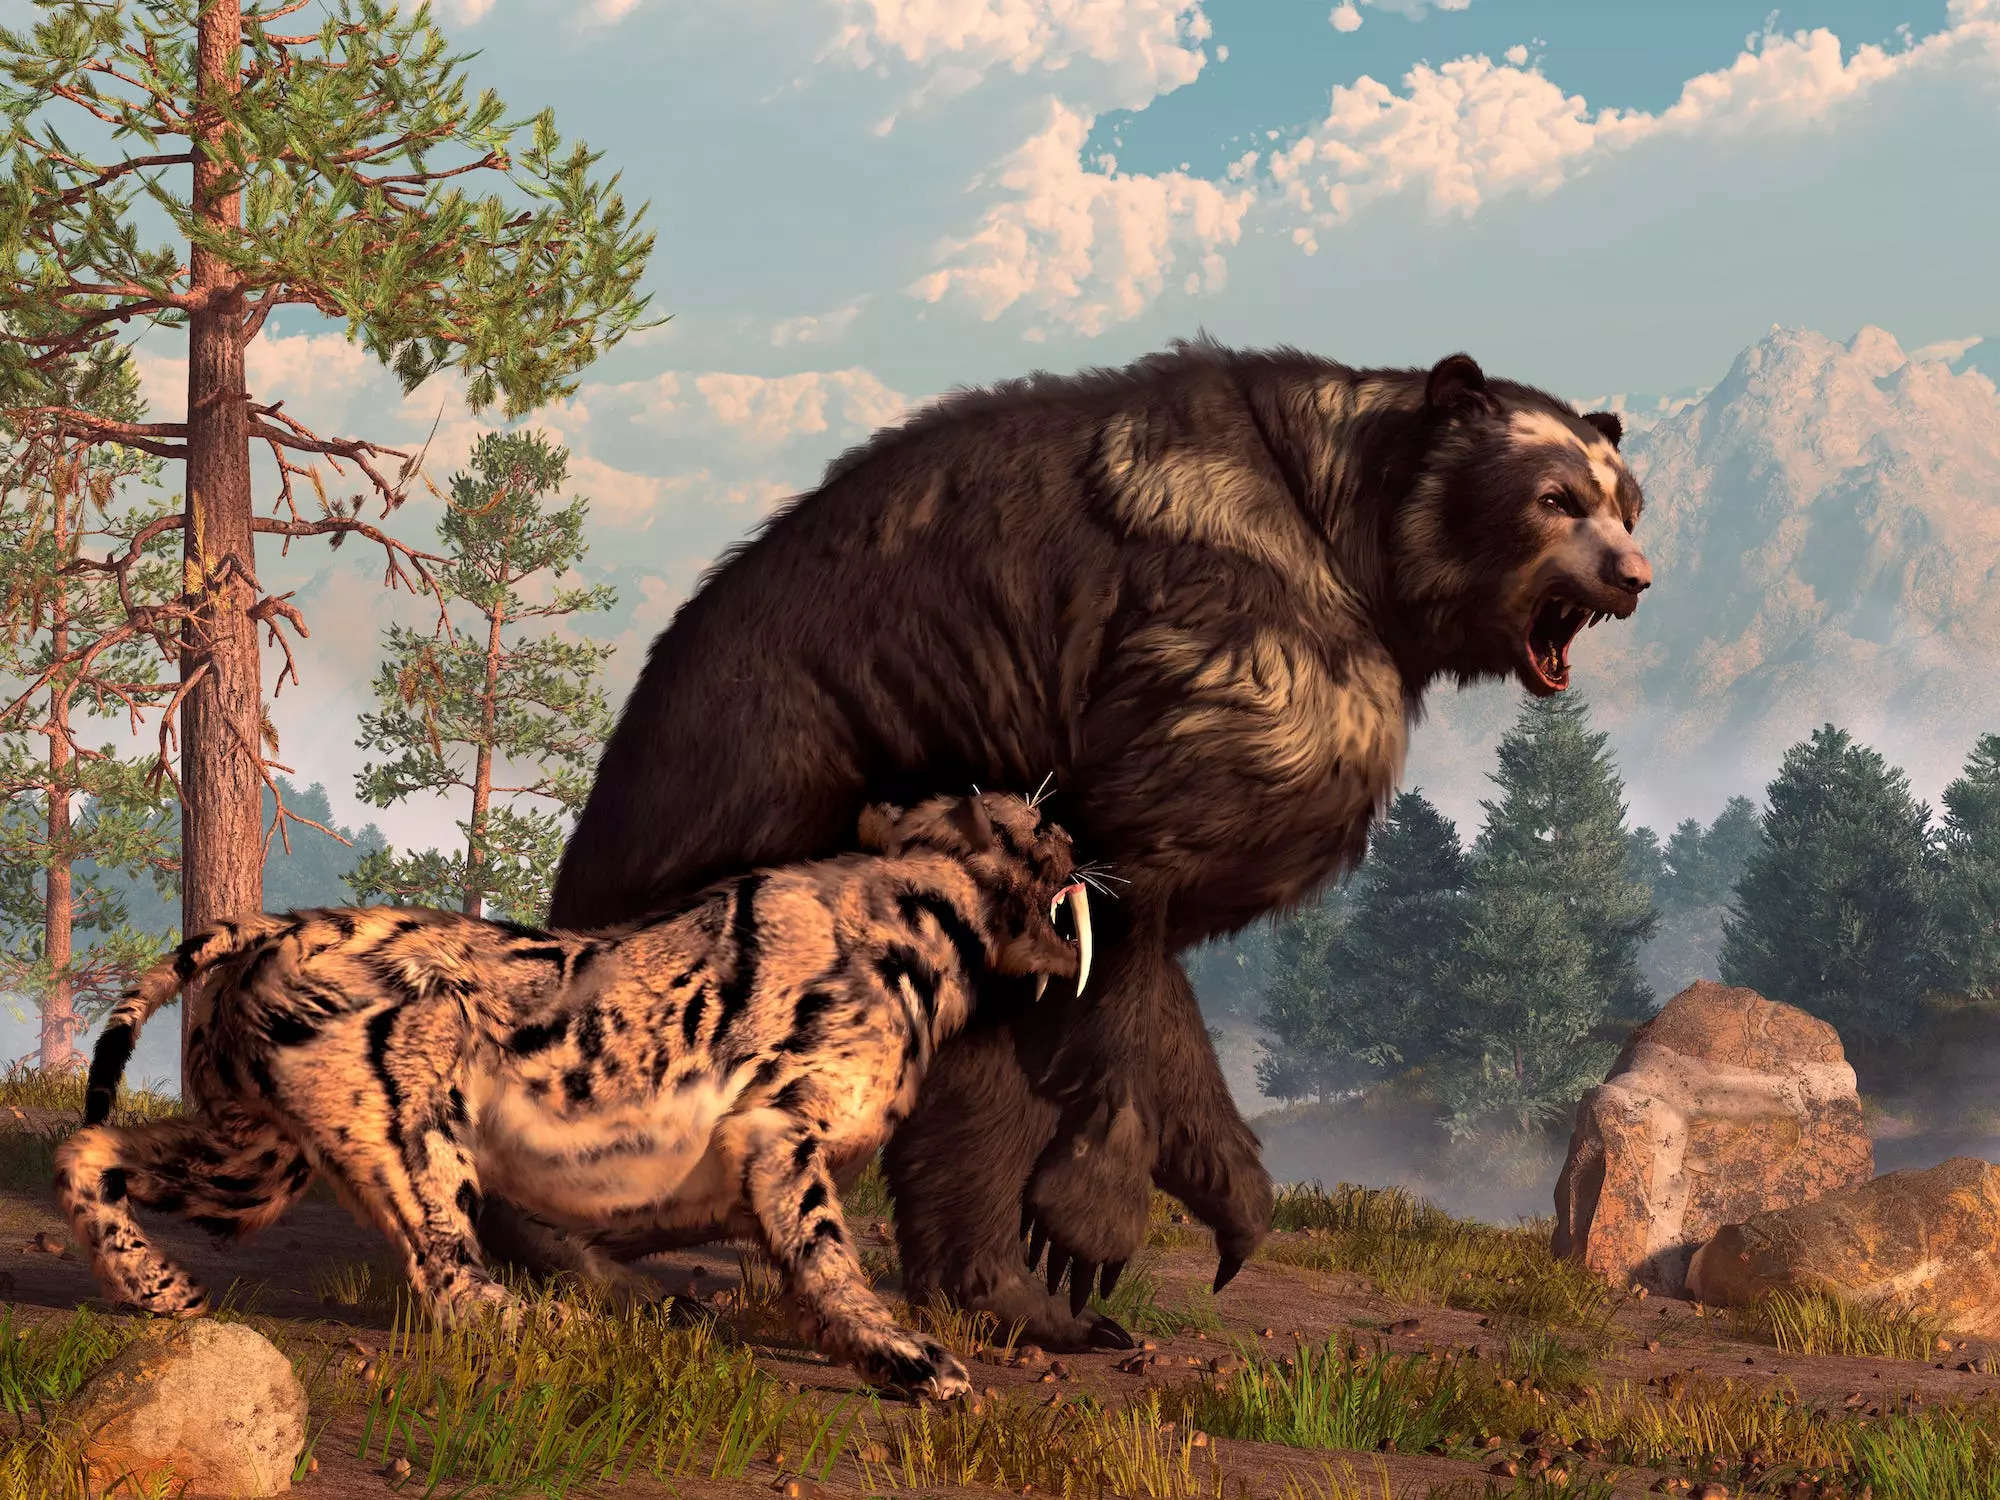 A saber-tooth cat and a short-faced bear roar at each other in an artist